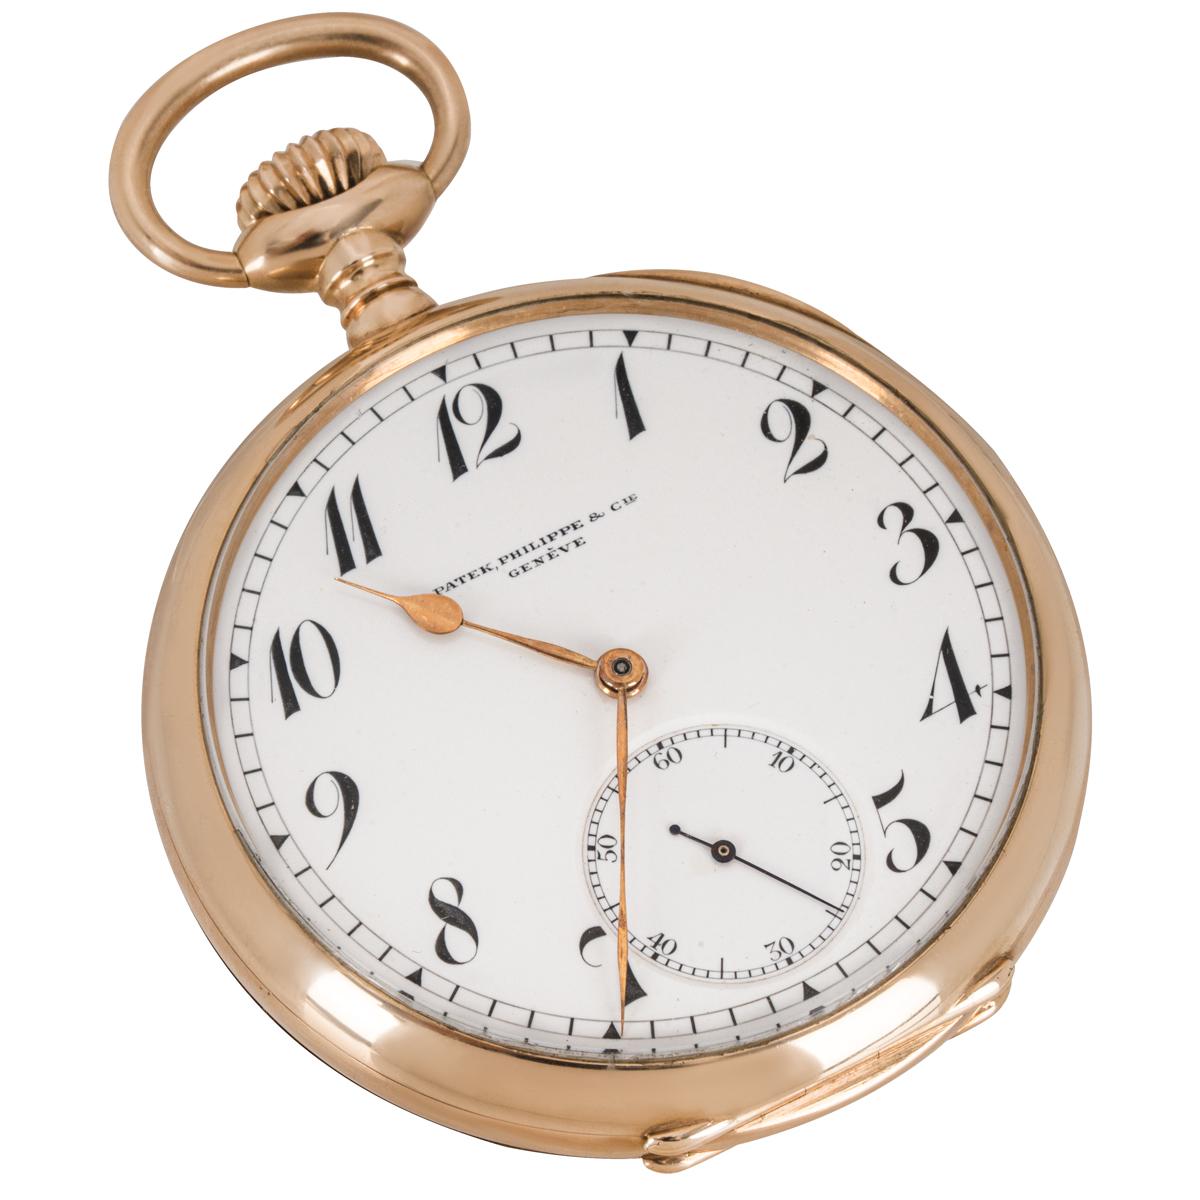 Patek Philippe. A Rare 14ct Rose Gold keyless lever Open Face Pocket Watch C1911.

Dial: The superb white enamel dial fully signed Patek Philippe & Cie Genève with rare Breguet numerals, outer minute track and subsidiary seconds dial with original